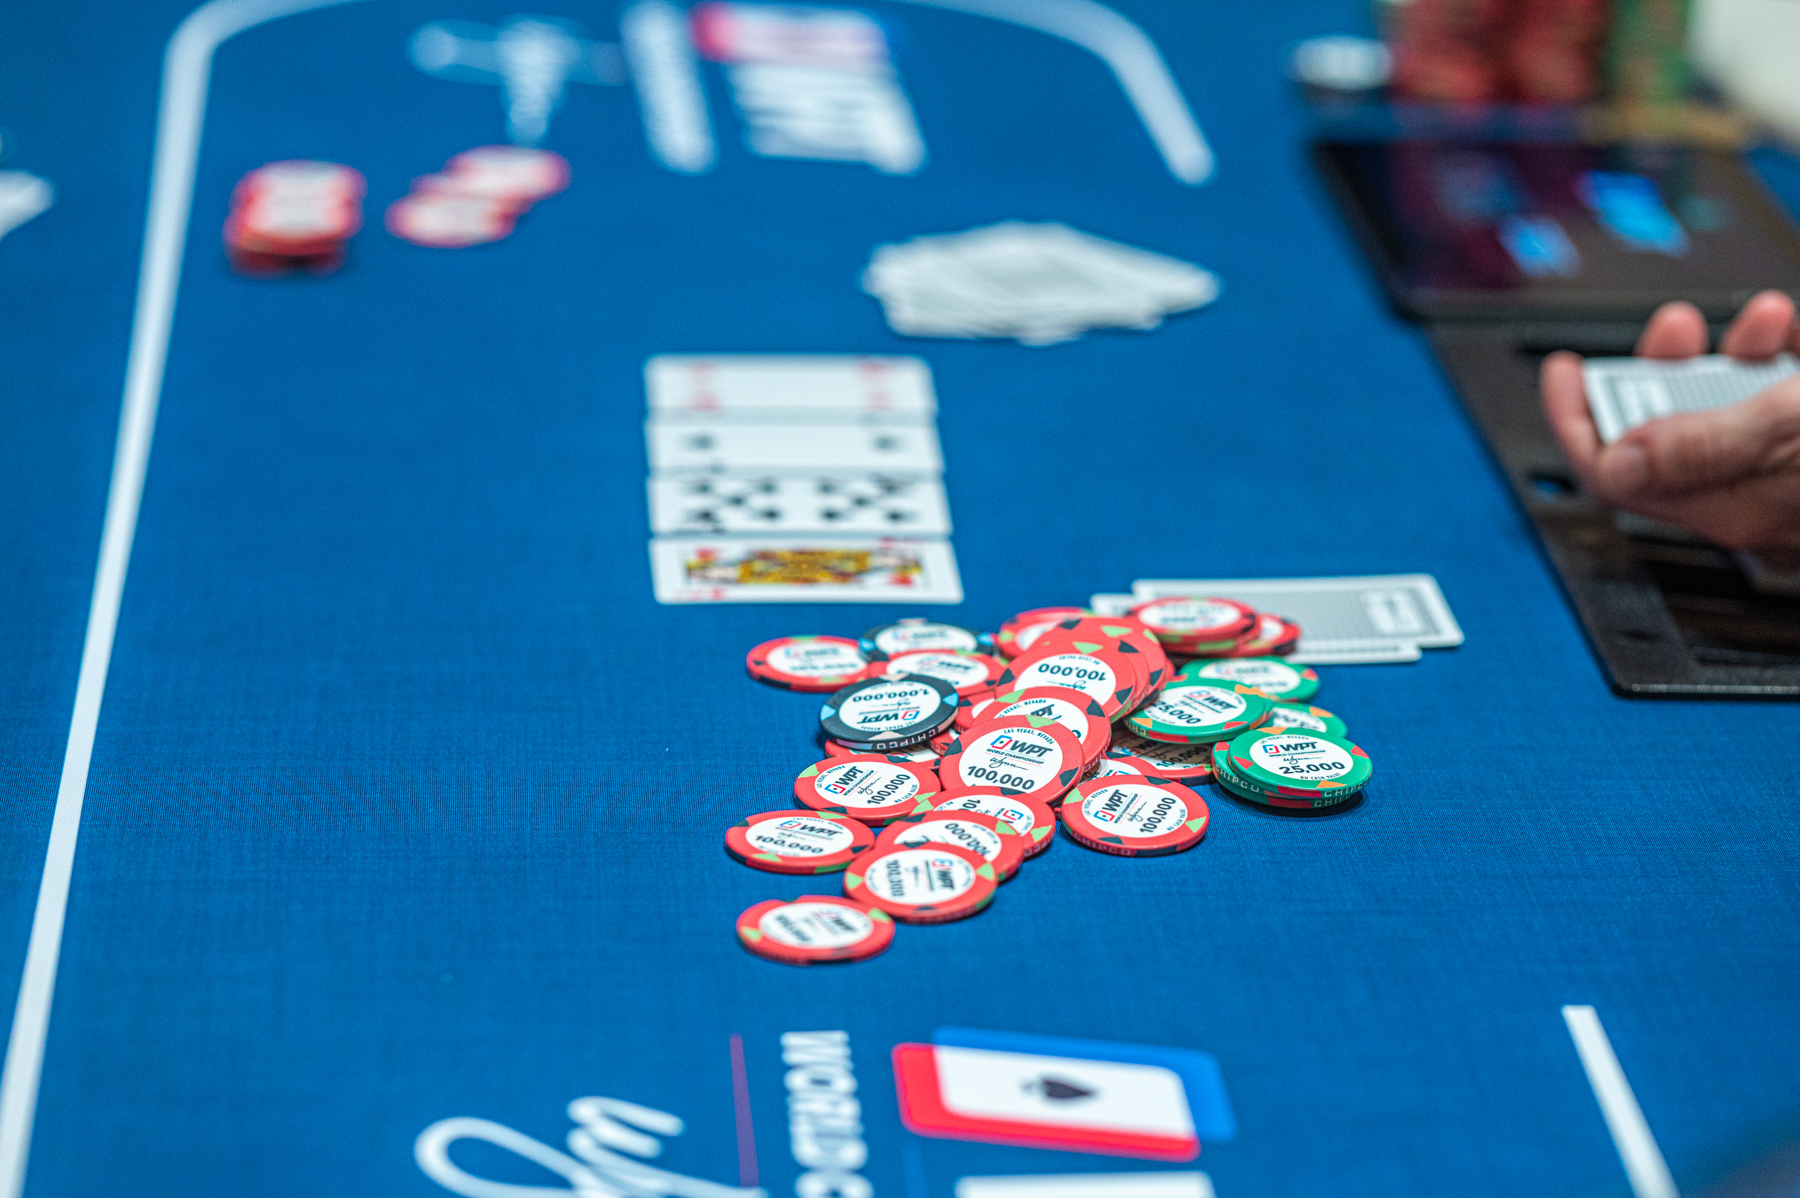 Dan’s WPT World Championship Diary #4: Tipping My Hat to Positive Experiences